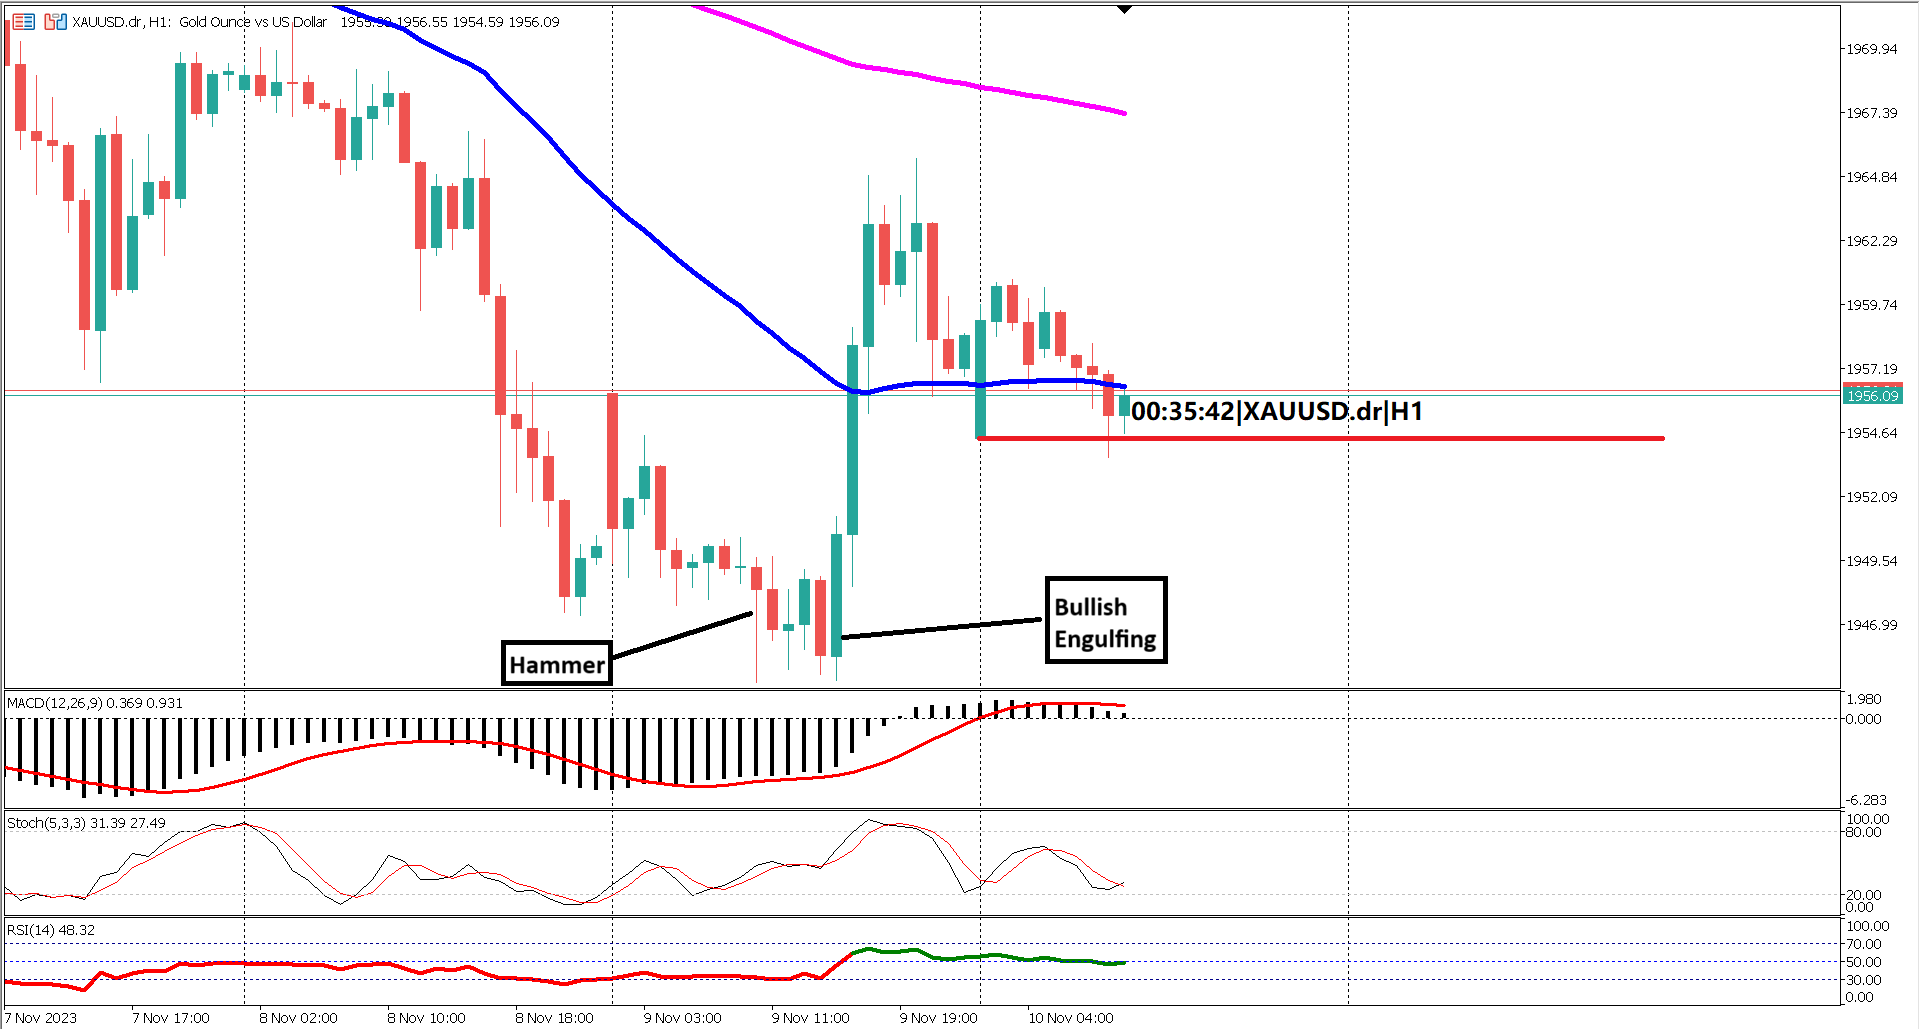 Jobless Claims Dip, but XAUUSD Shows Signs of a Dead Cat Bounce – What Lies Ahead?